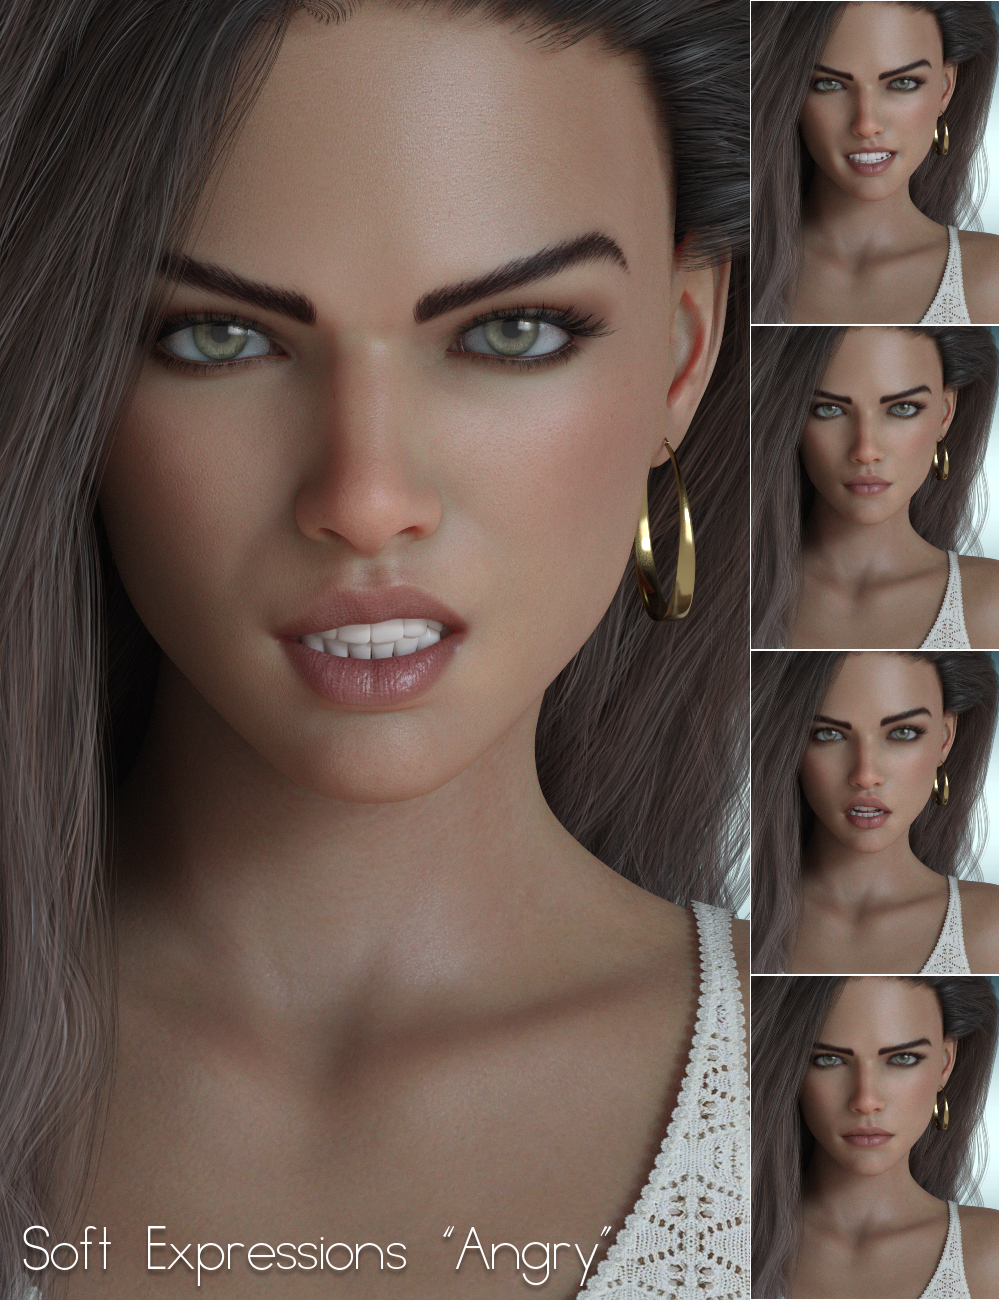 Soft Expressions Collection 2 for Genesis 8 Females by: P3Design, 3D Models by Daz 3D